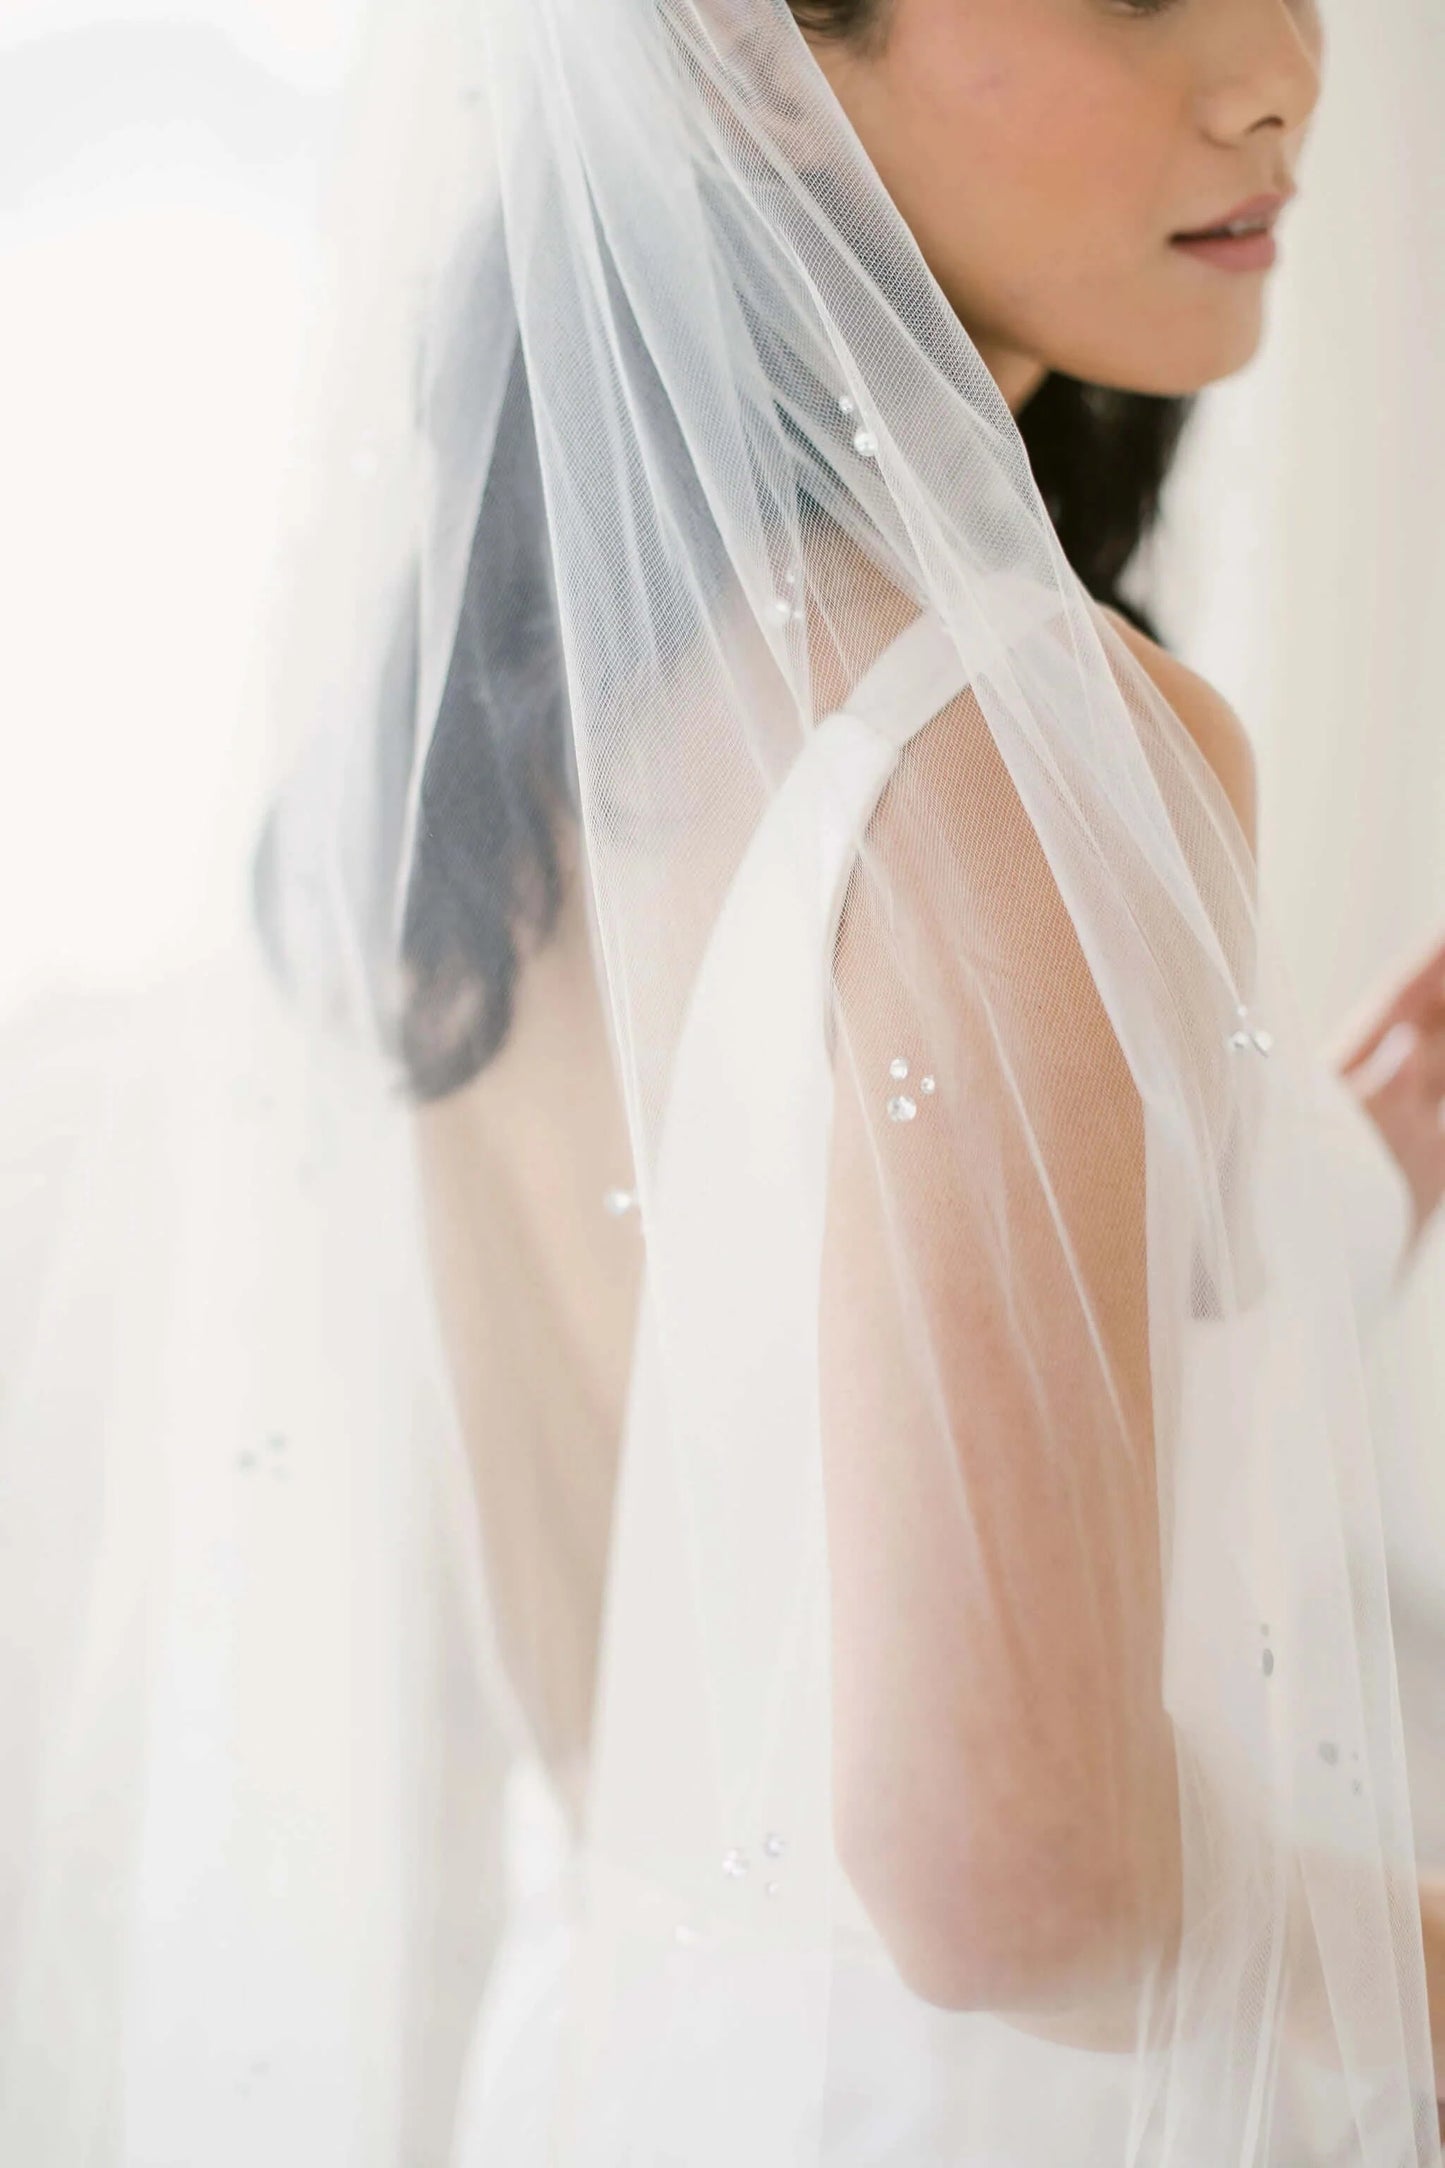 Illusion tulle veil with trio crystal accents - ready to ship Tessa Kim